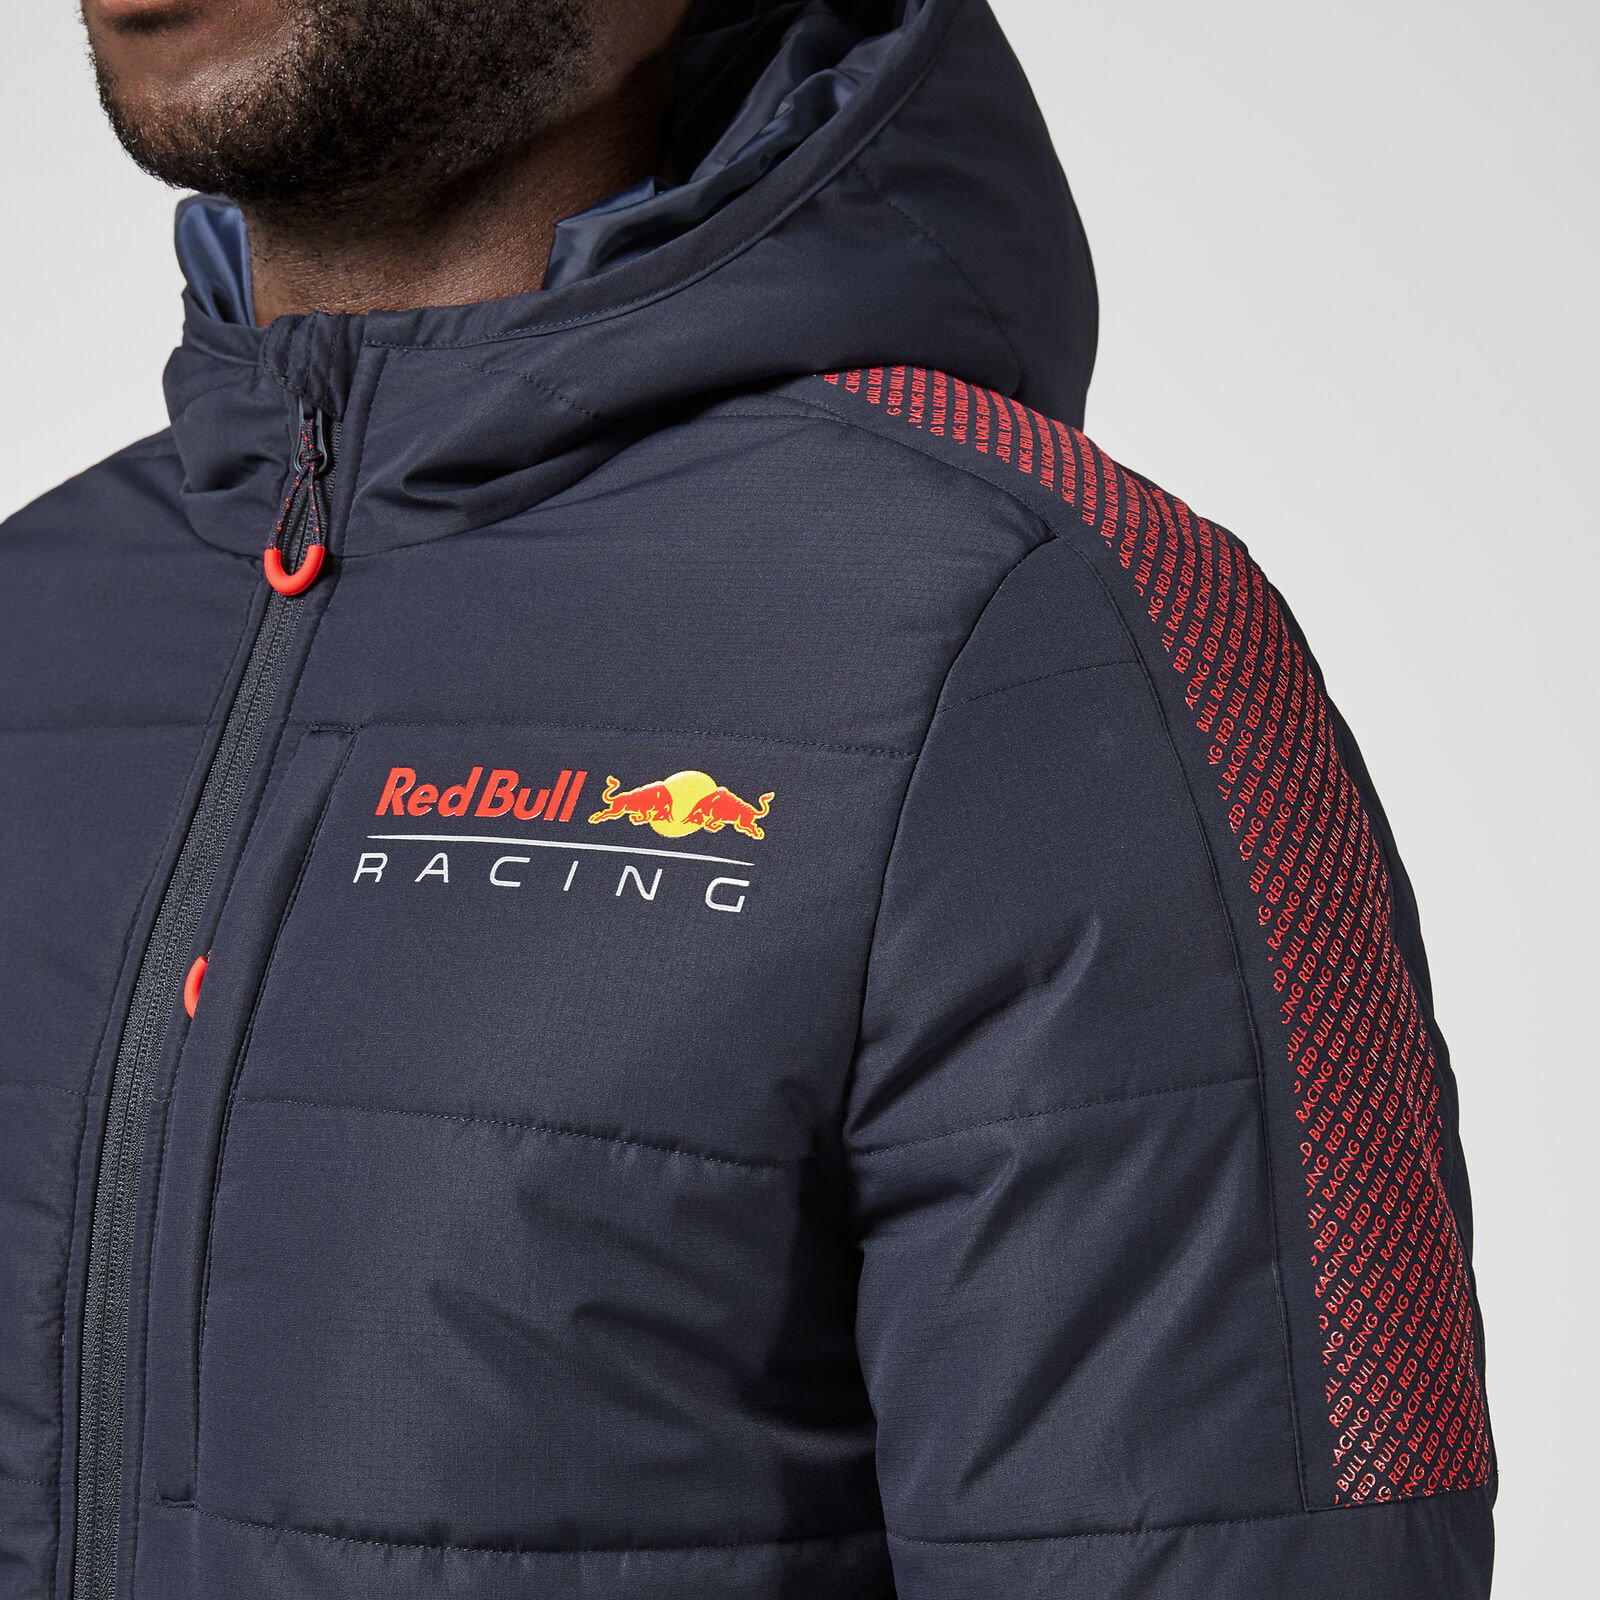 Unisex Adults F1 Team Racing Red Bull Jacket Navy Blue Embroidery Cotton  Padded